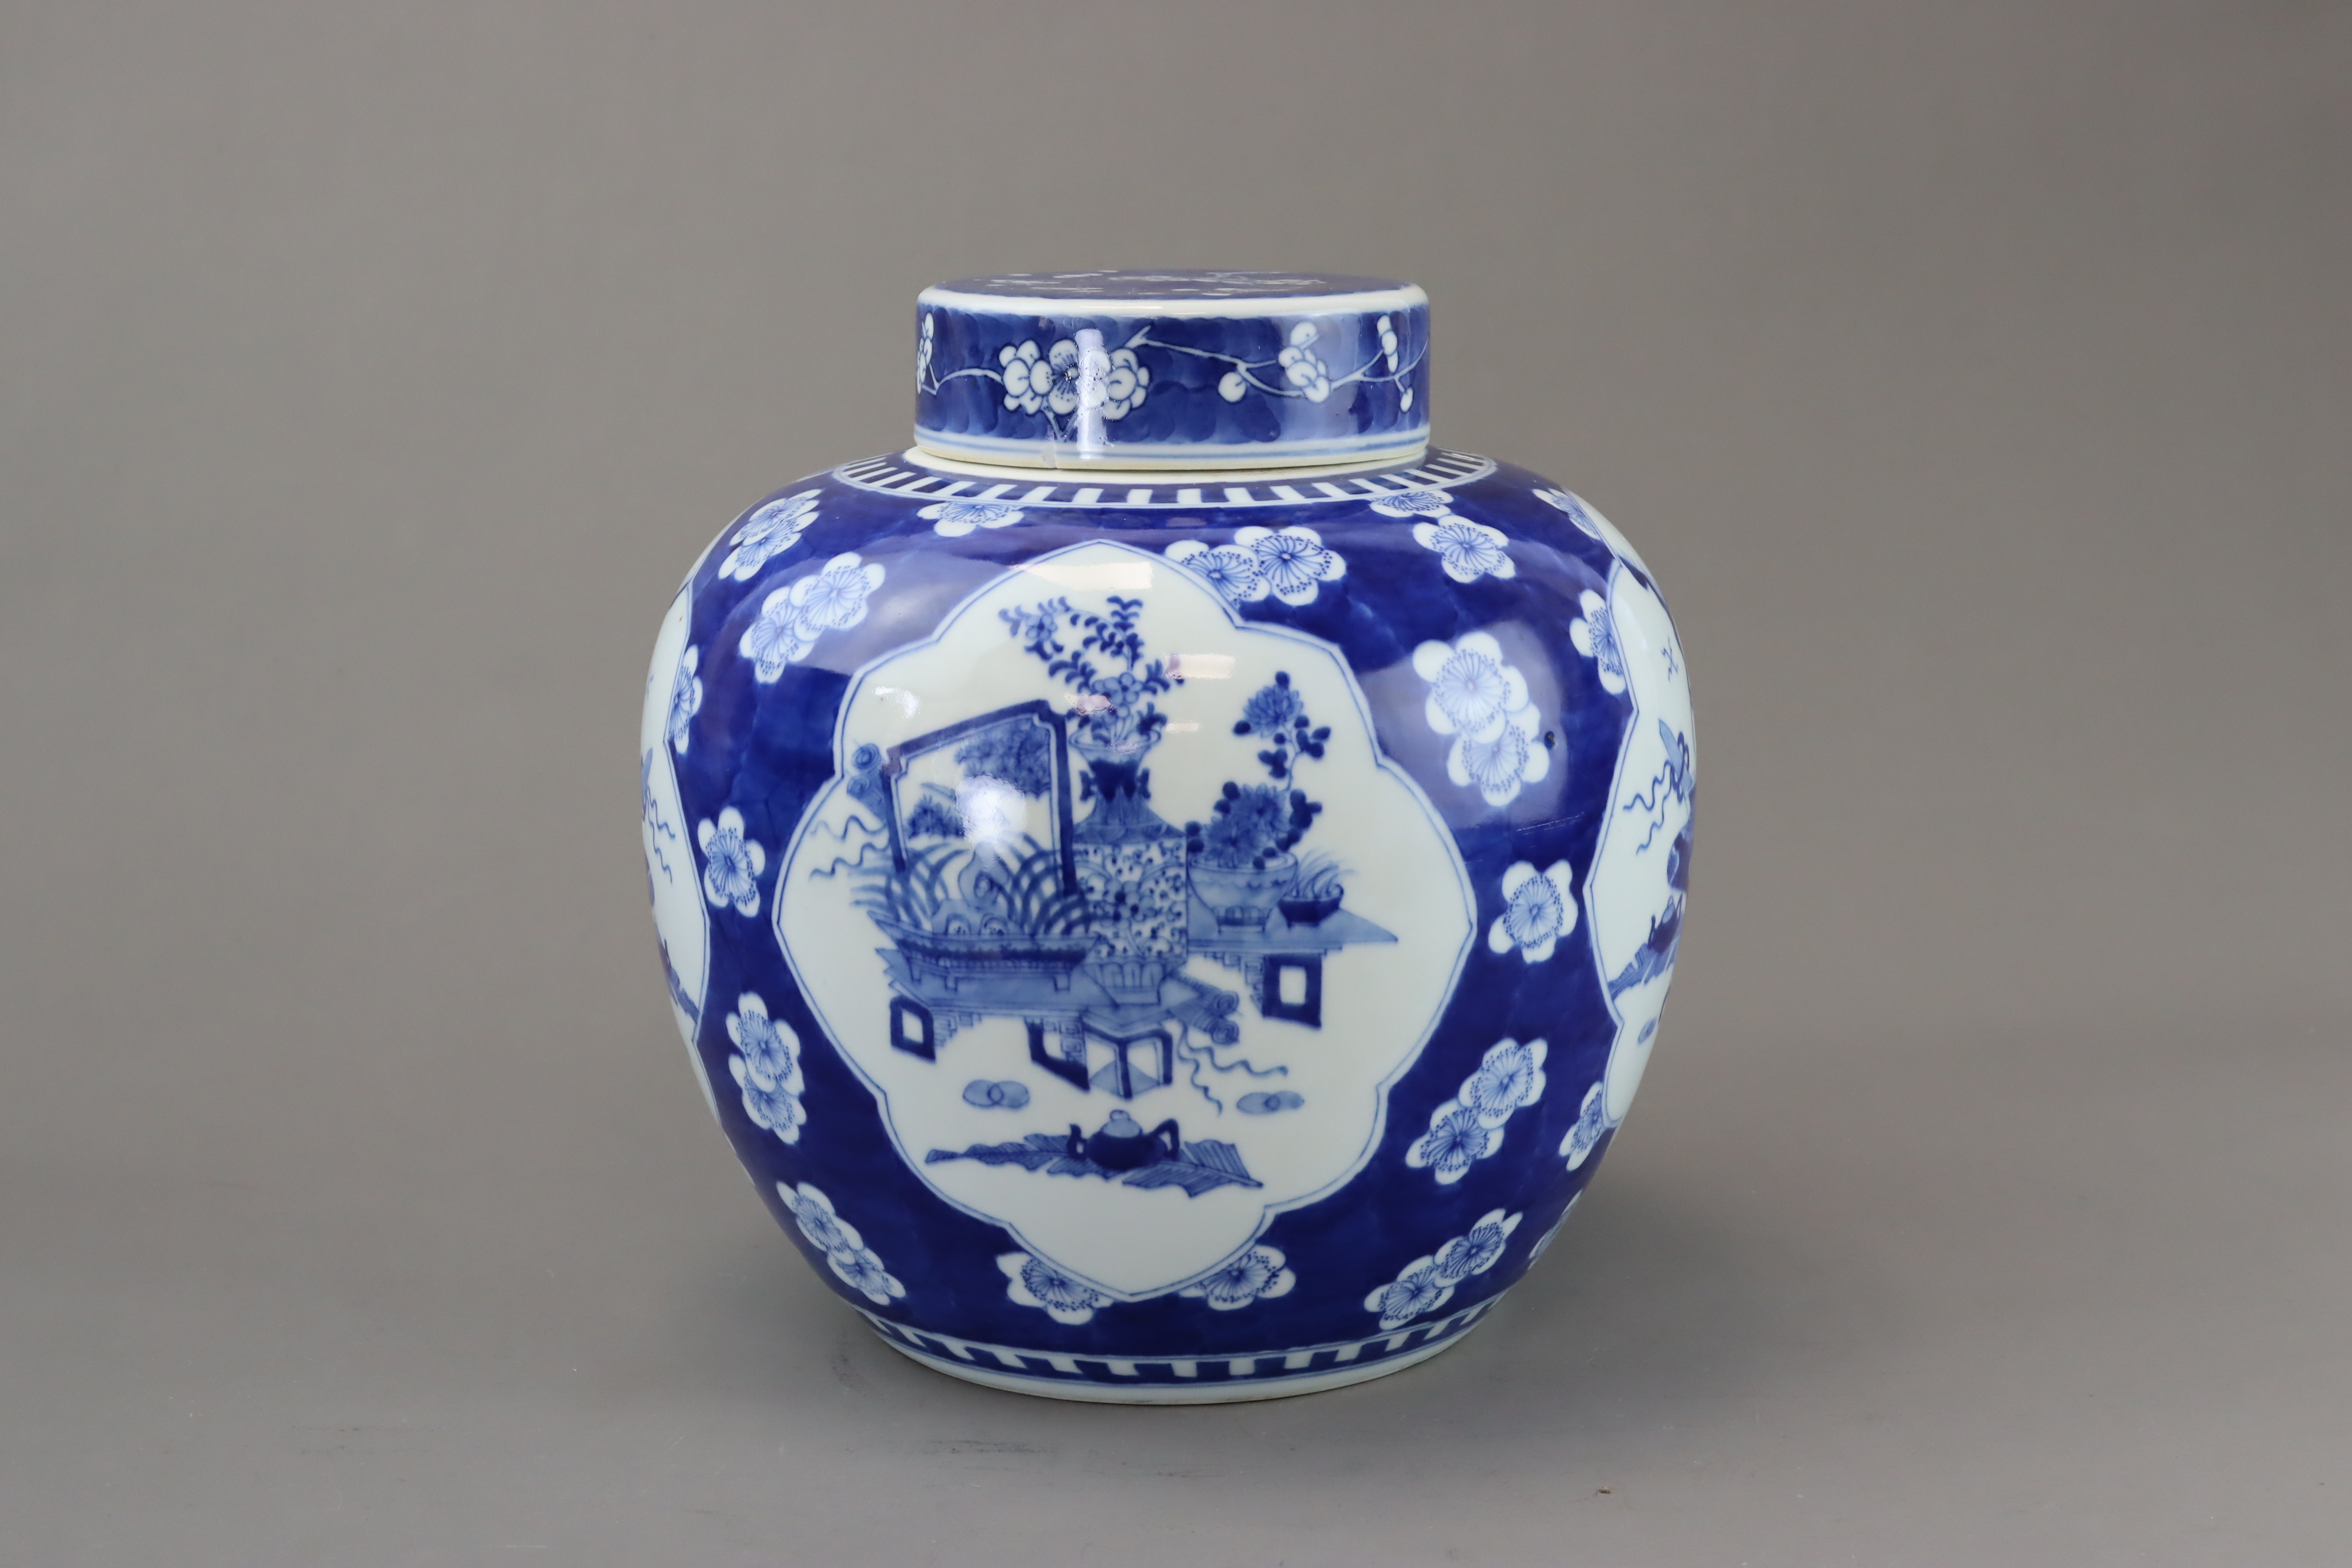 A Blue and White Jar and Cover with Prunus and the 'Hundred Treasures', Late Qing dynasty - Image 5 of 7